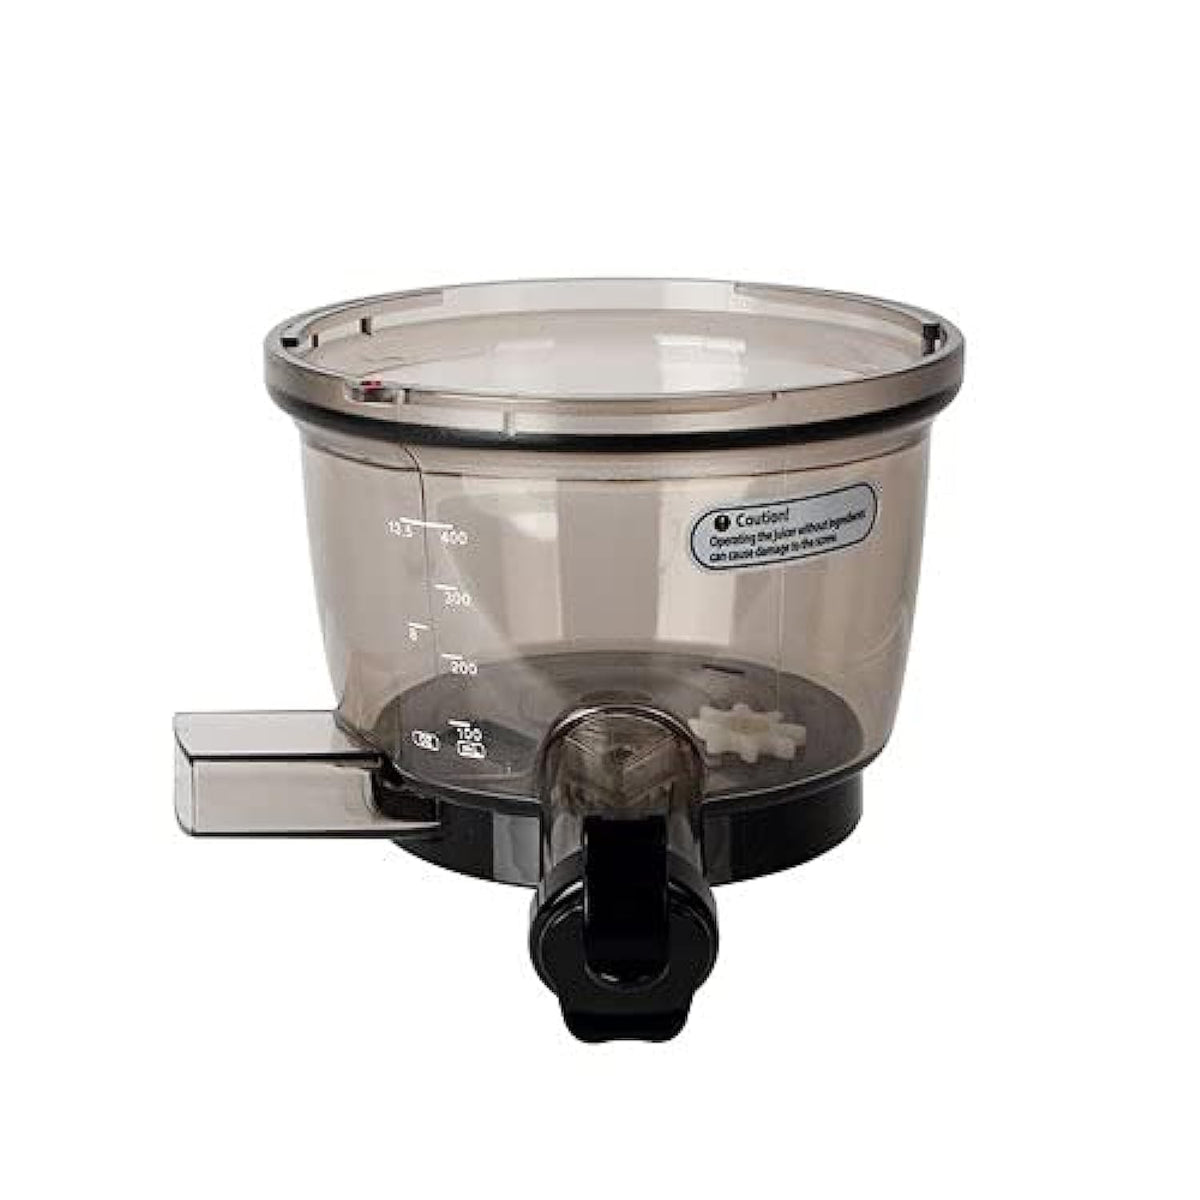 Kuvings B1700 Juicer Spares, Compatible only with Kuvings B1700 Cold Press Juicer only (Juicing Bowl)